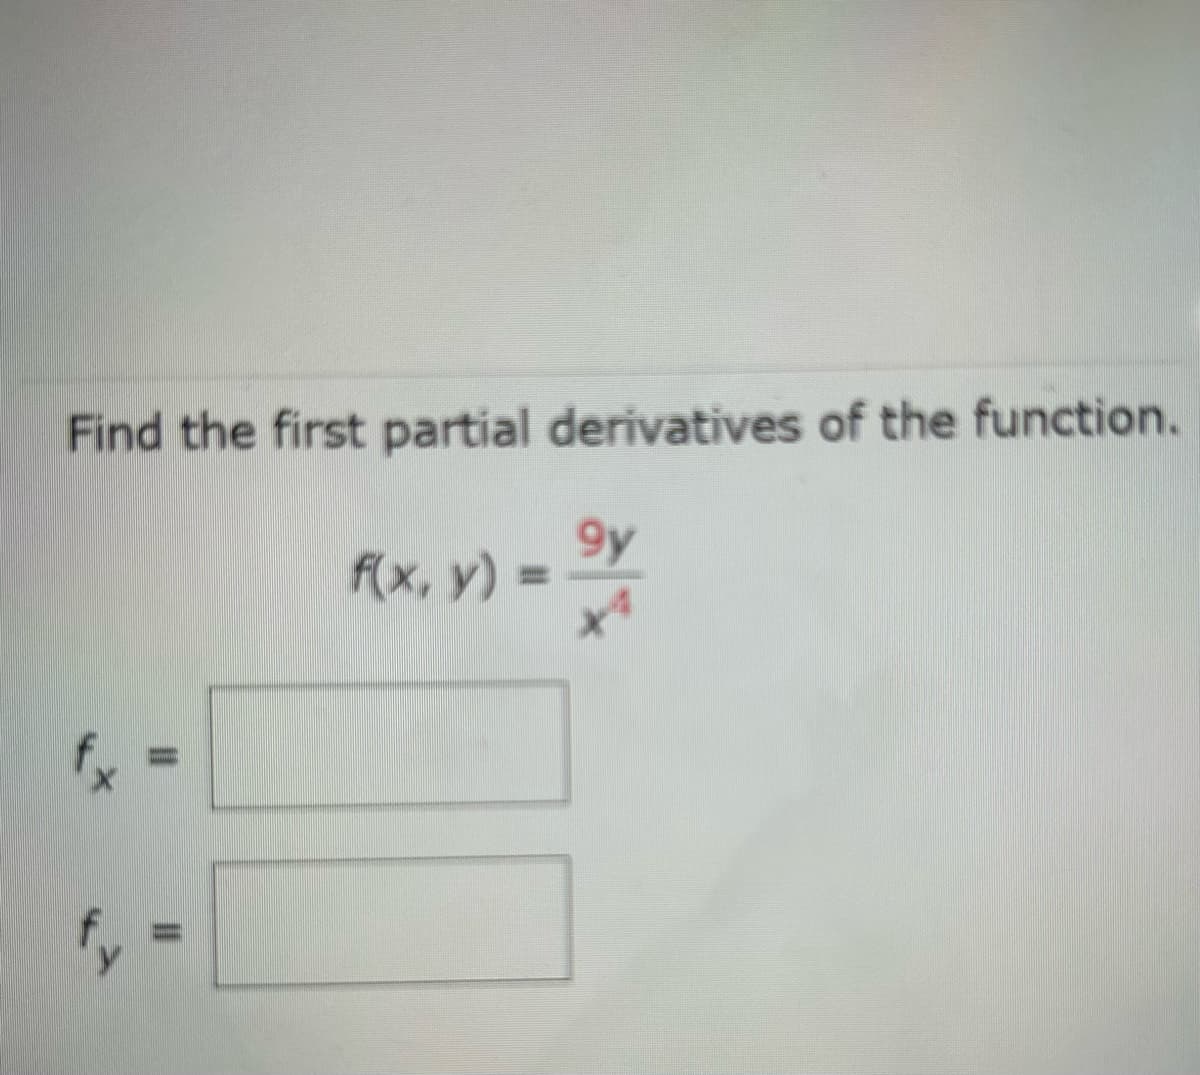 Find the first partial derivatives of the function.
9y
X4
||
||
f(x, y) =